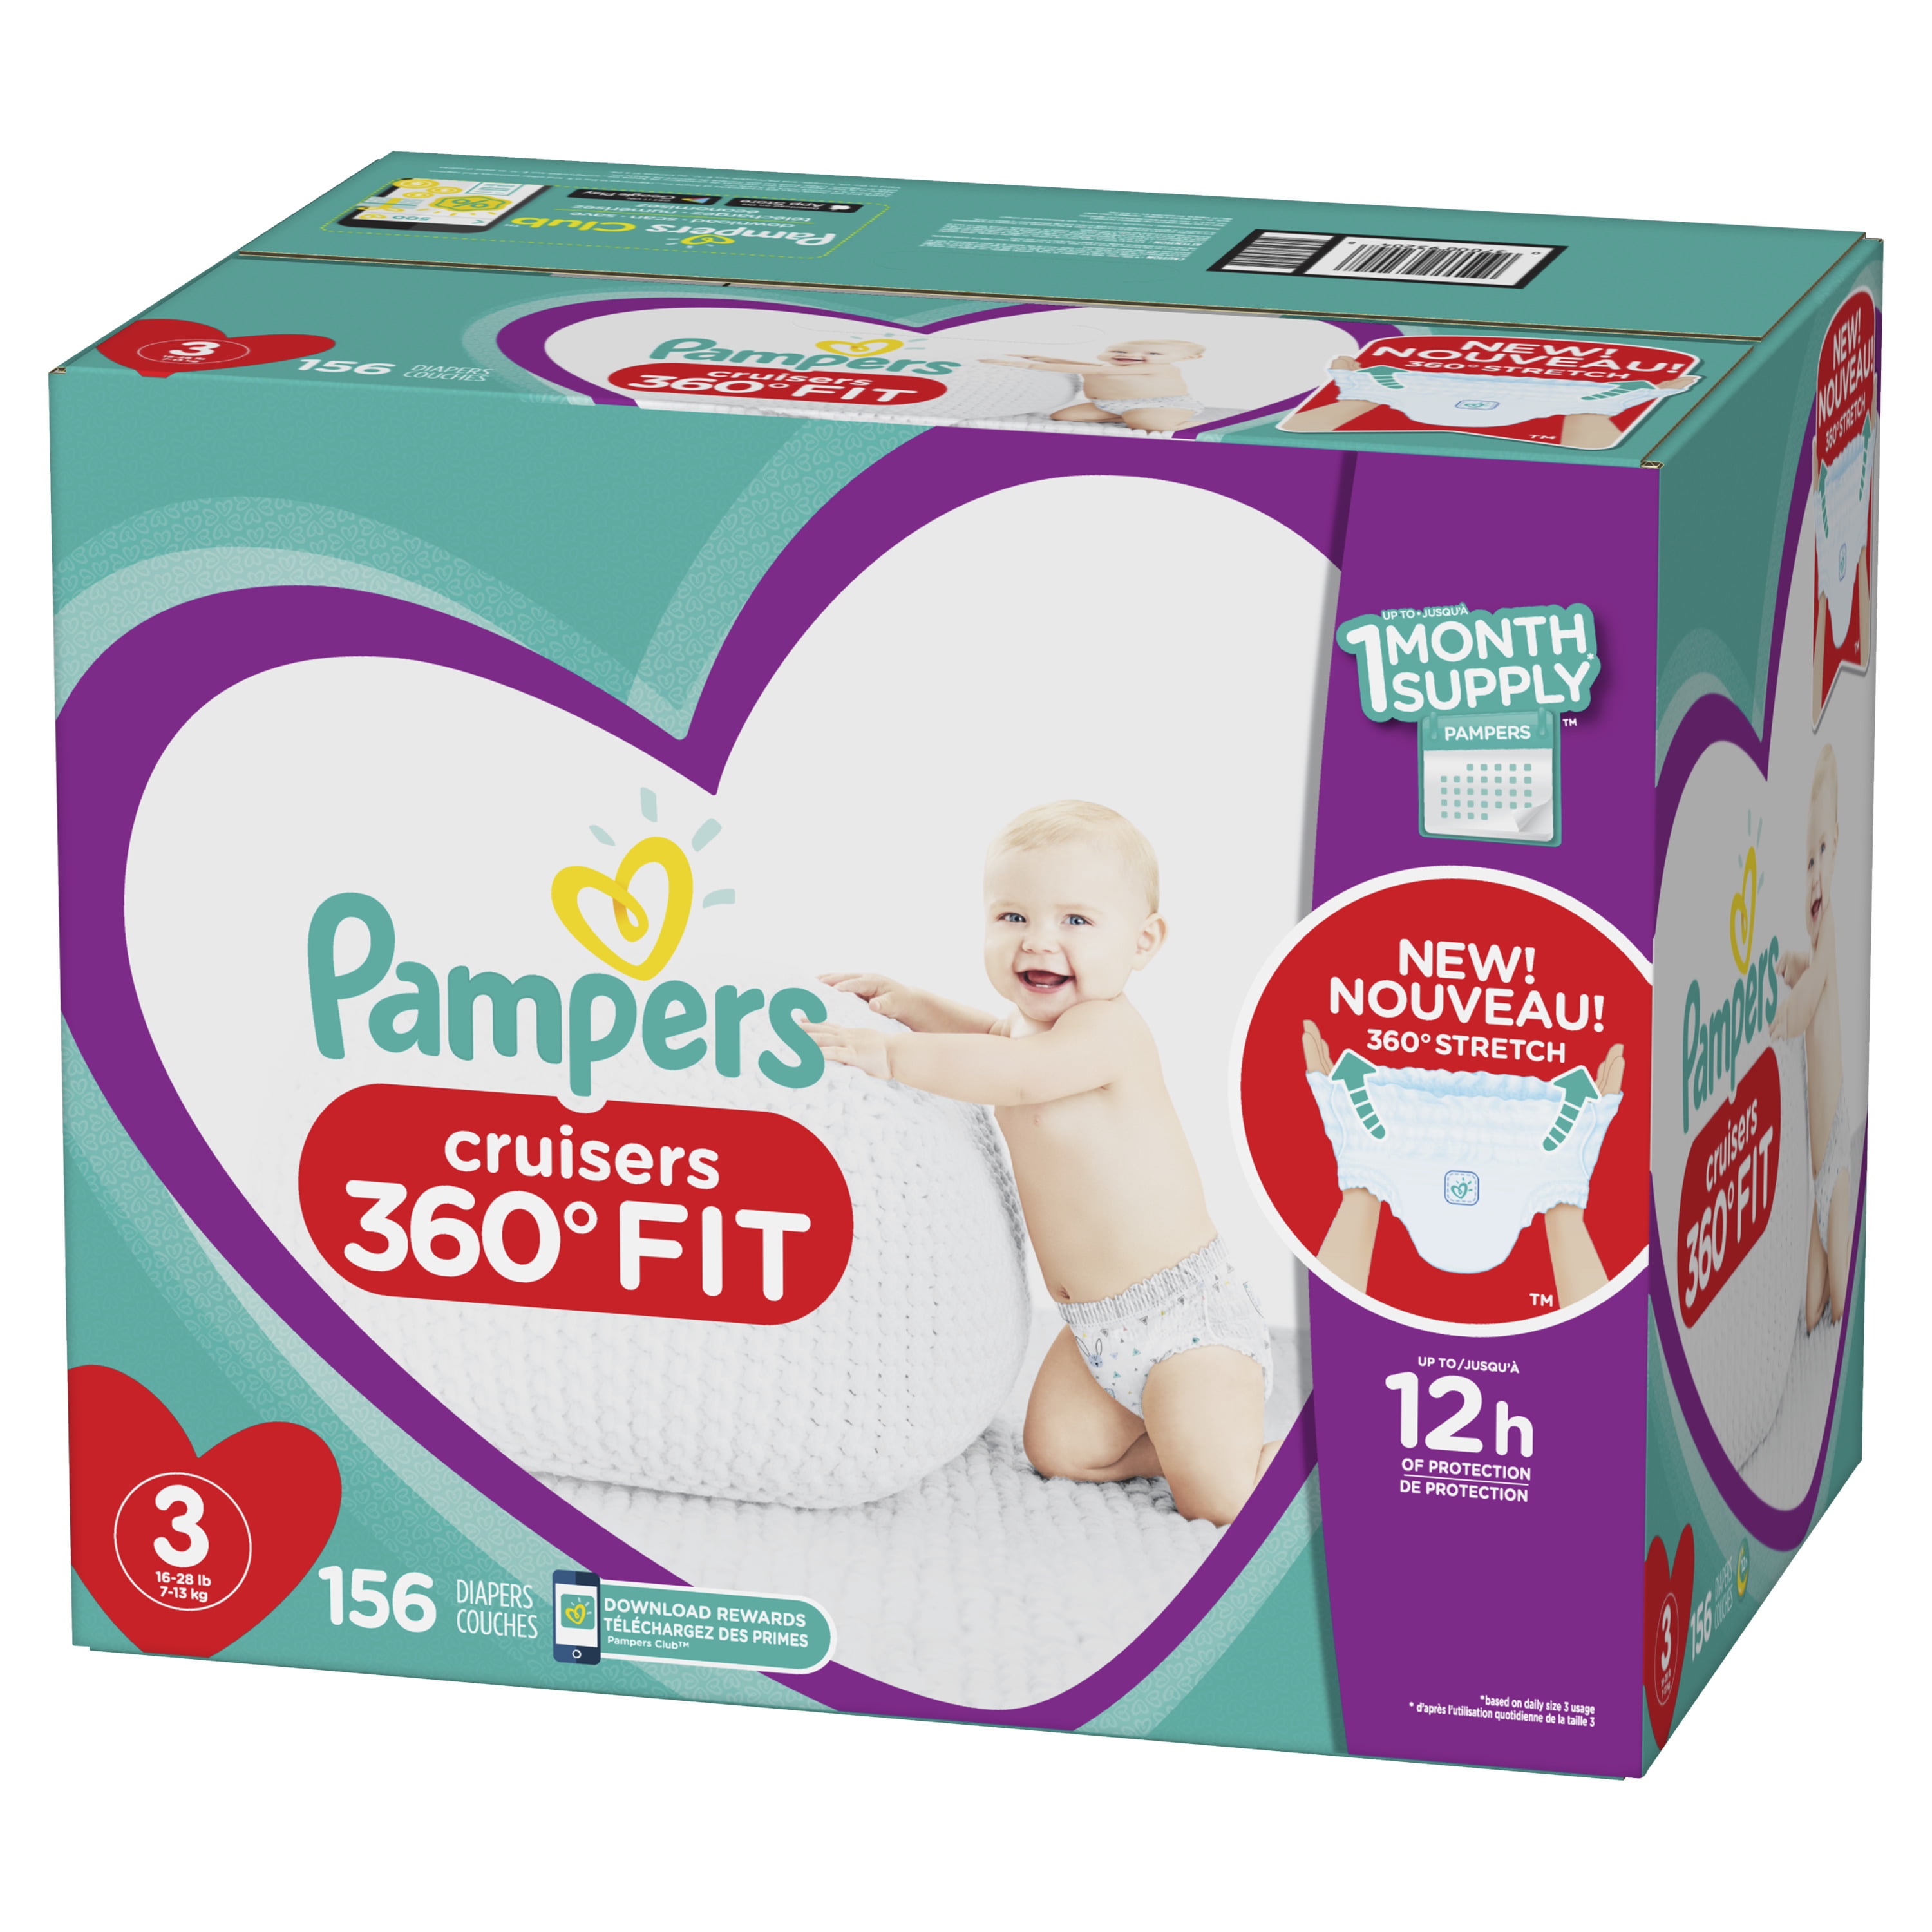 Pampers 360 Size Chart